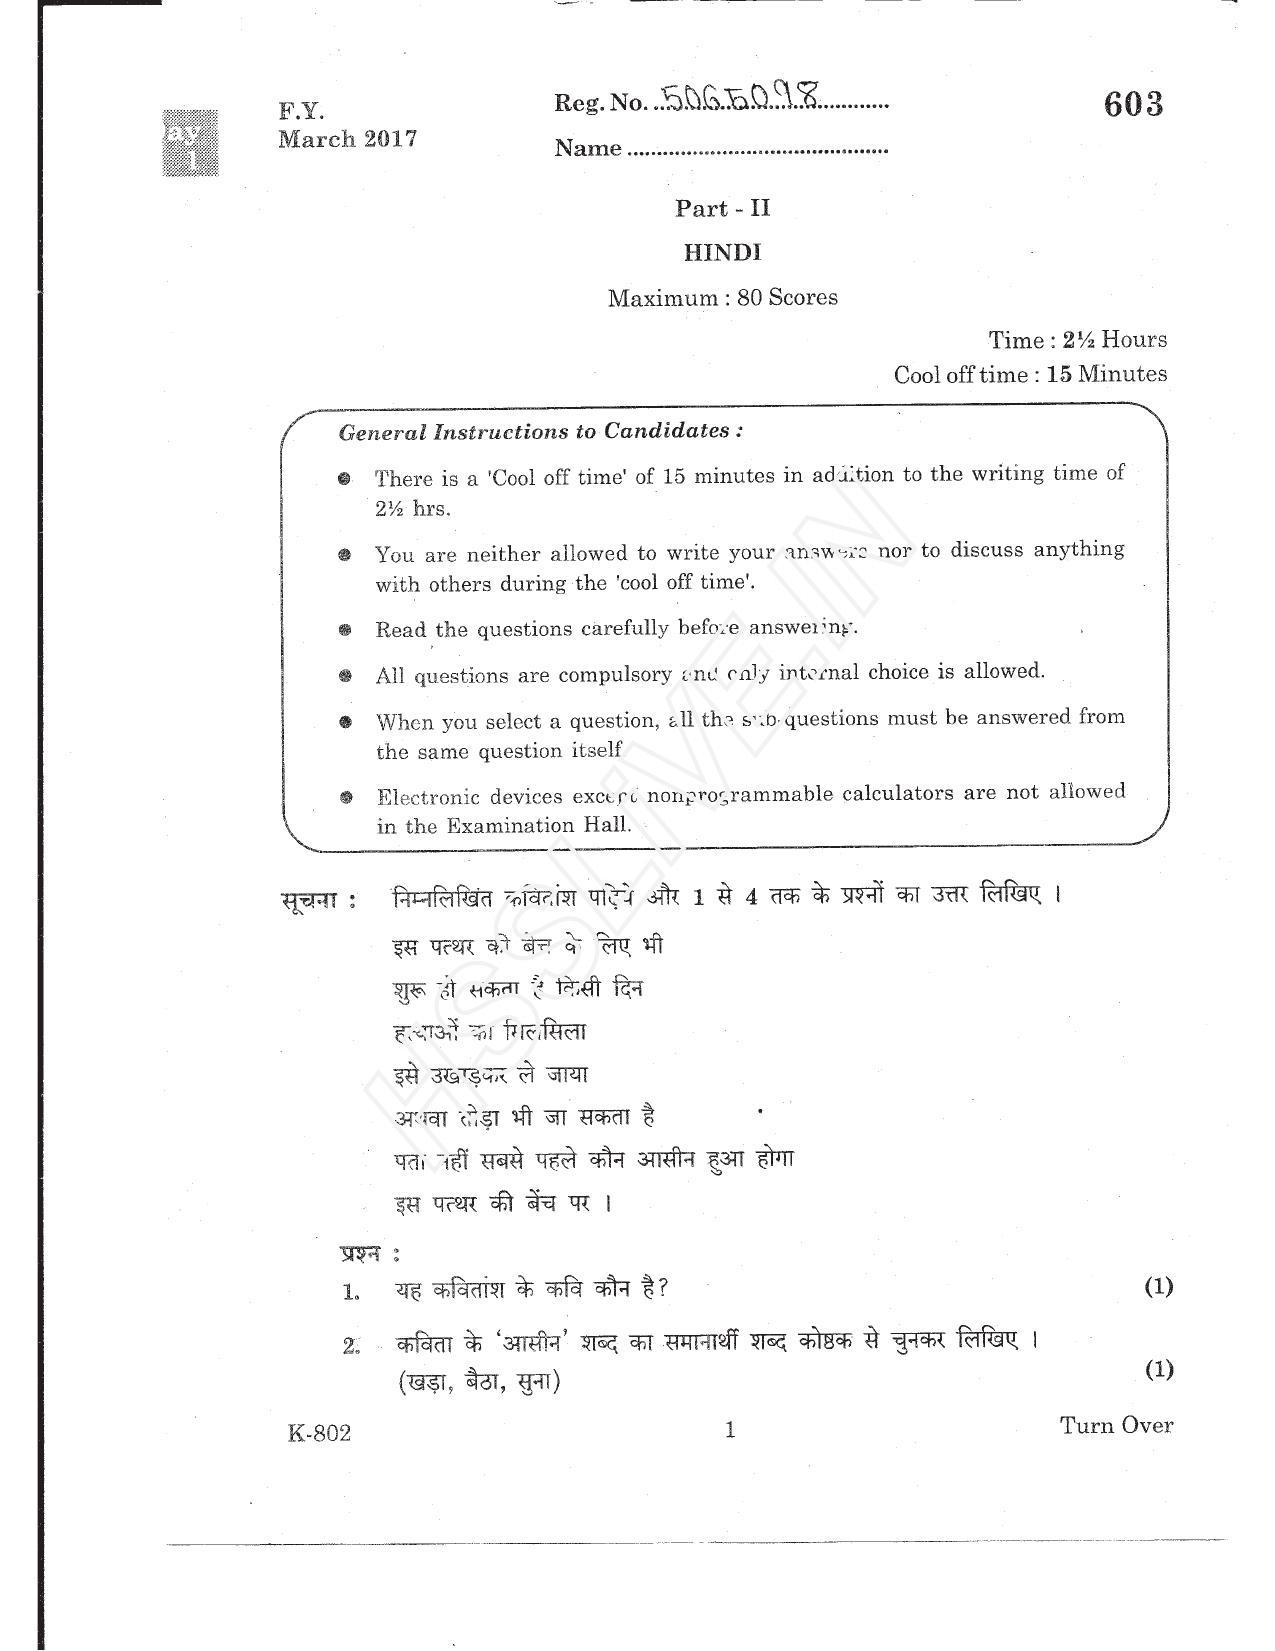 Kerala Plus One 2017 Hindi Question Papers - Page 1